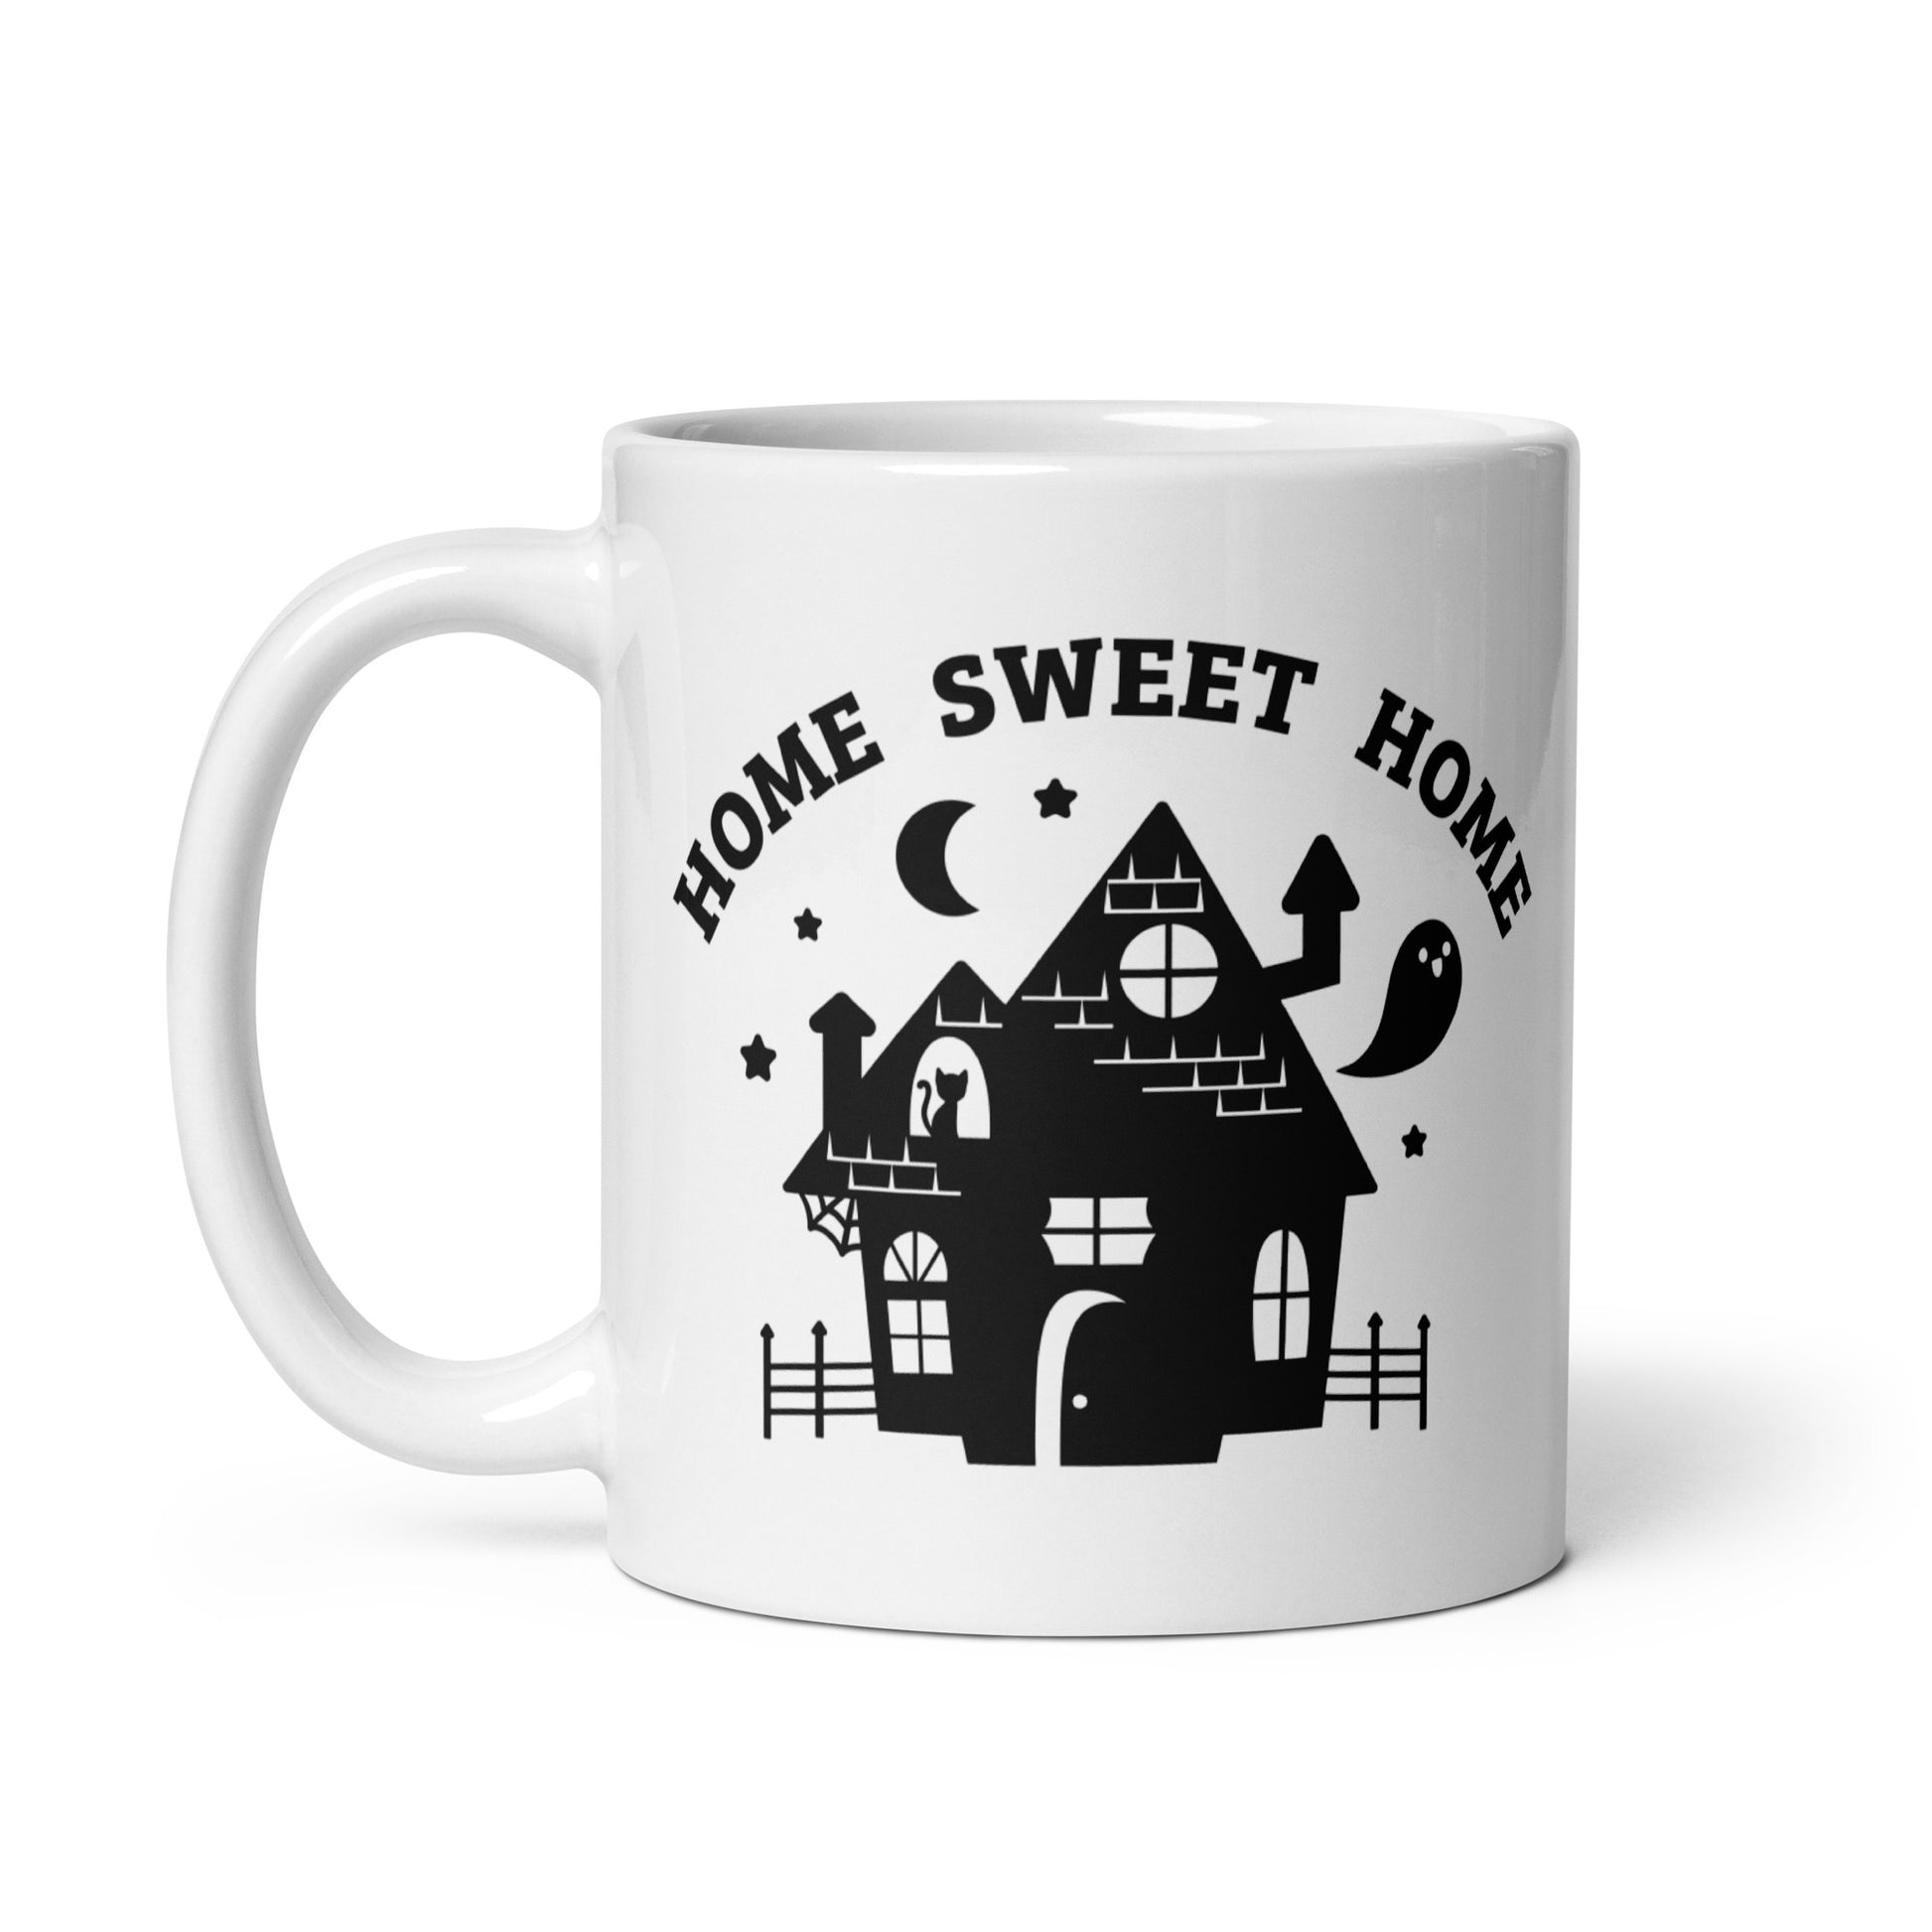 A white 11 ounce ceramic coffee mug featuring an illustration of a haunted house. Text above the house in an arc reads "Home Sweet Home"